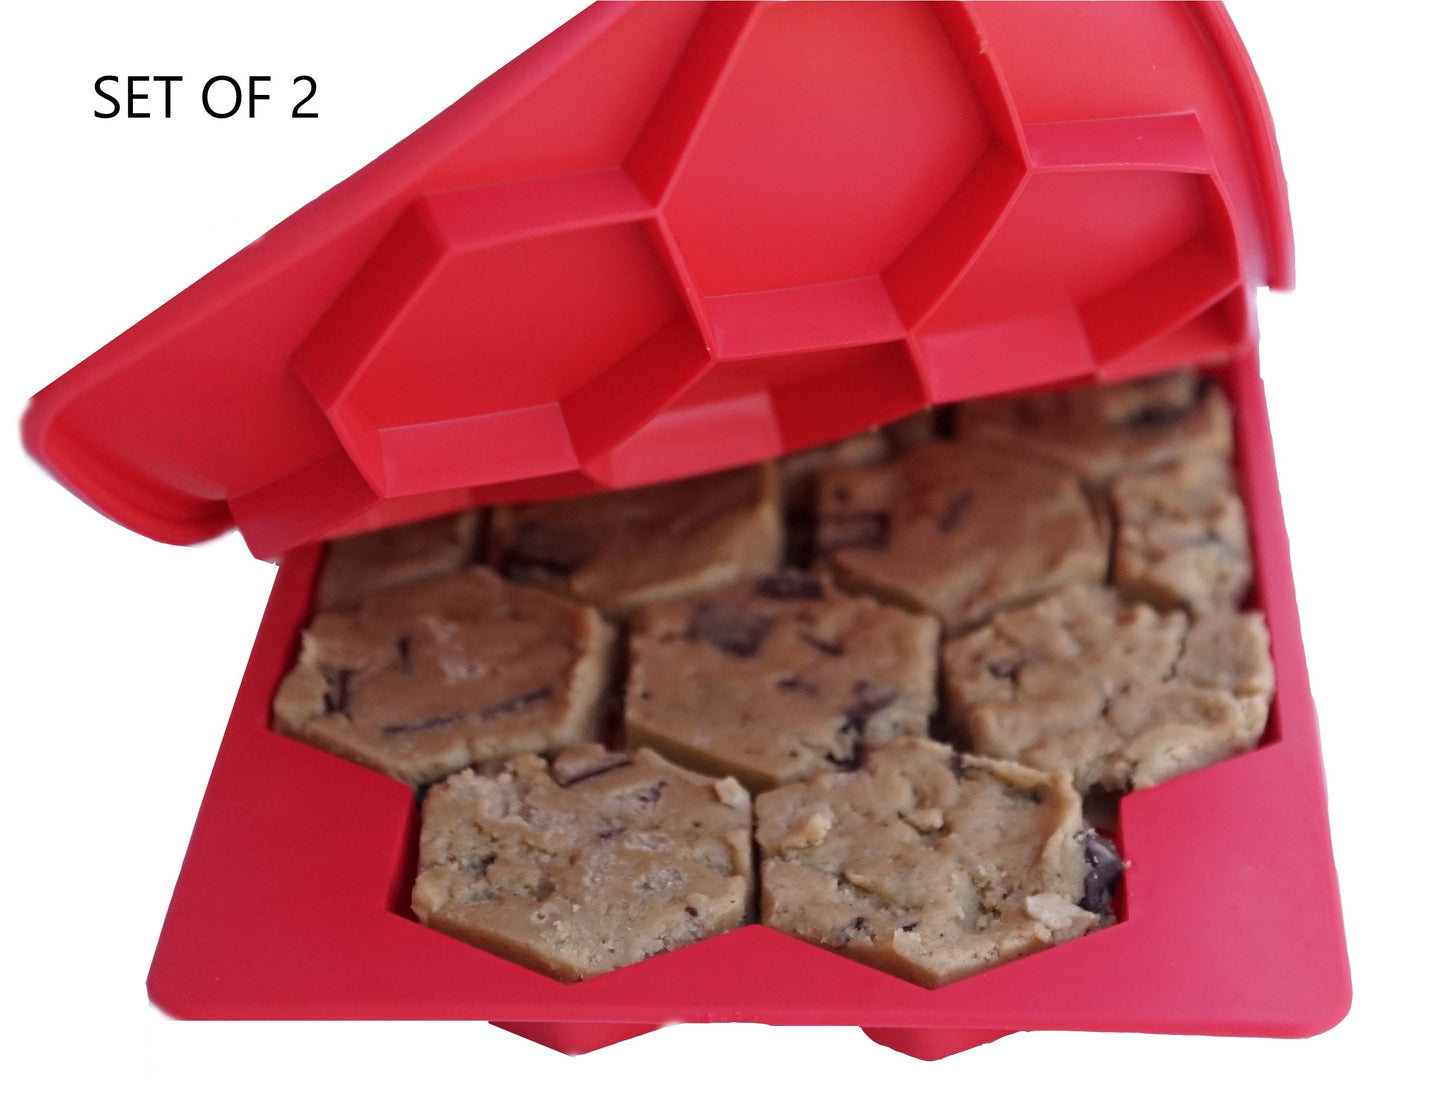 The Smart Cookie set of 2